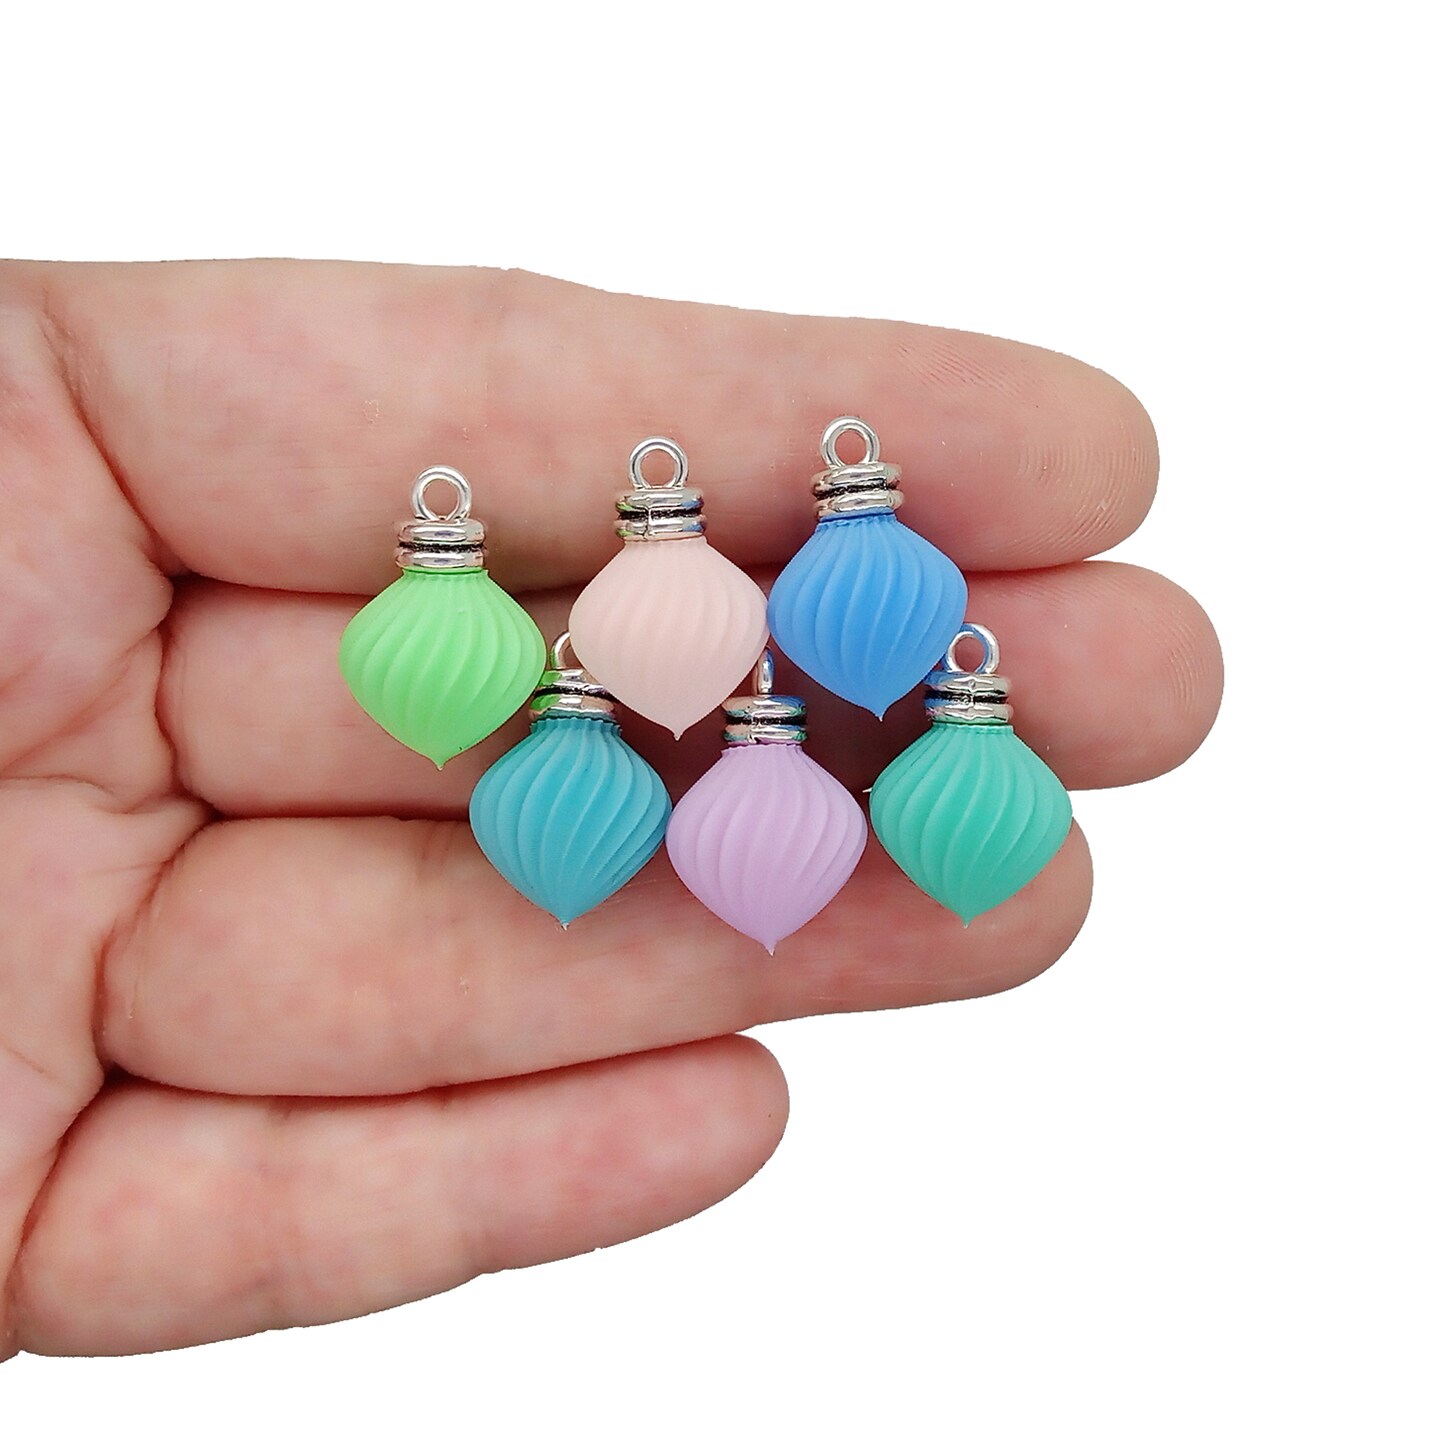 10 Mini Christmas Ornaments, Cute Pastel Baubles for Tiny Trees, Dollhouse Miniatures, Adorabilities